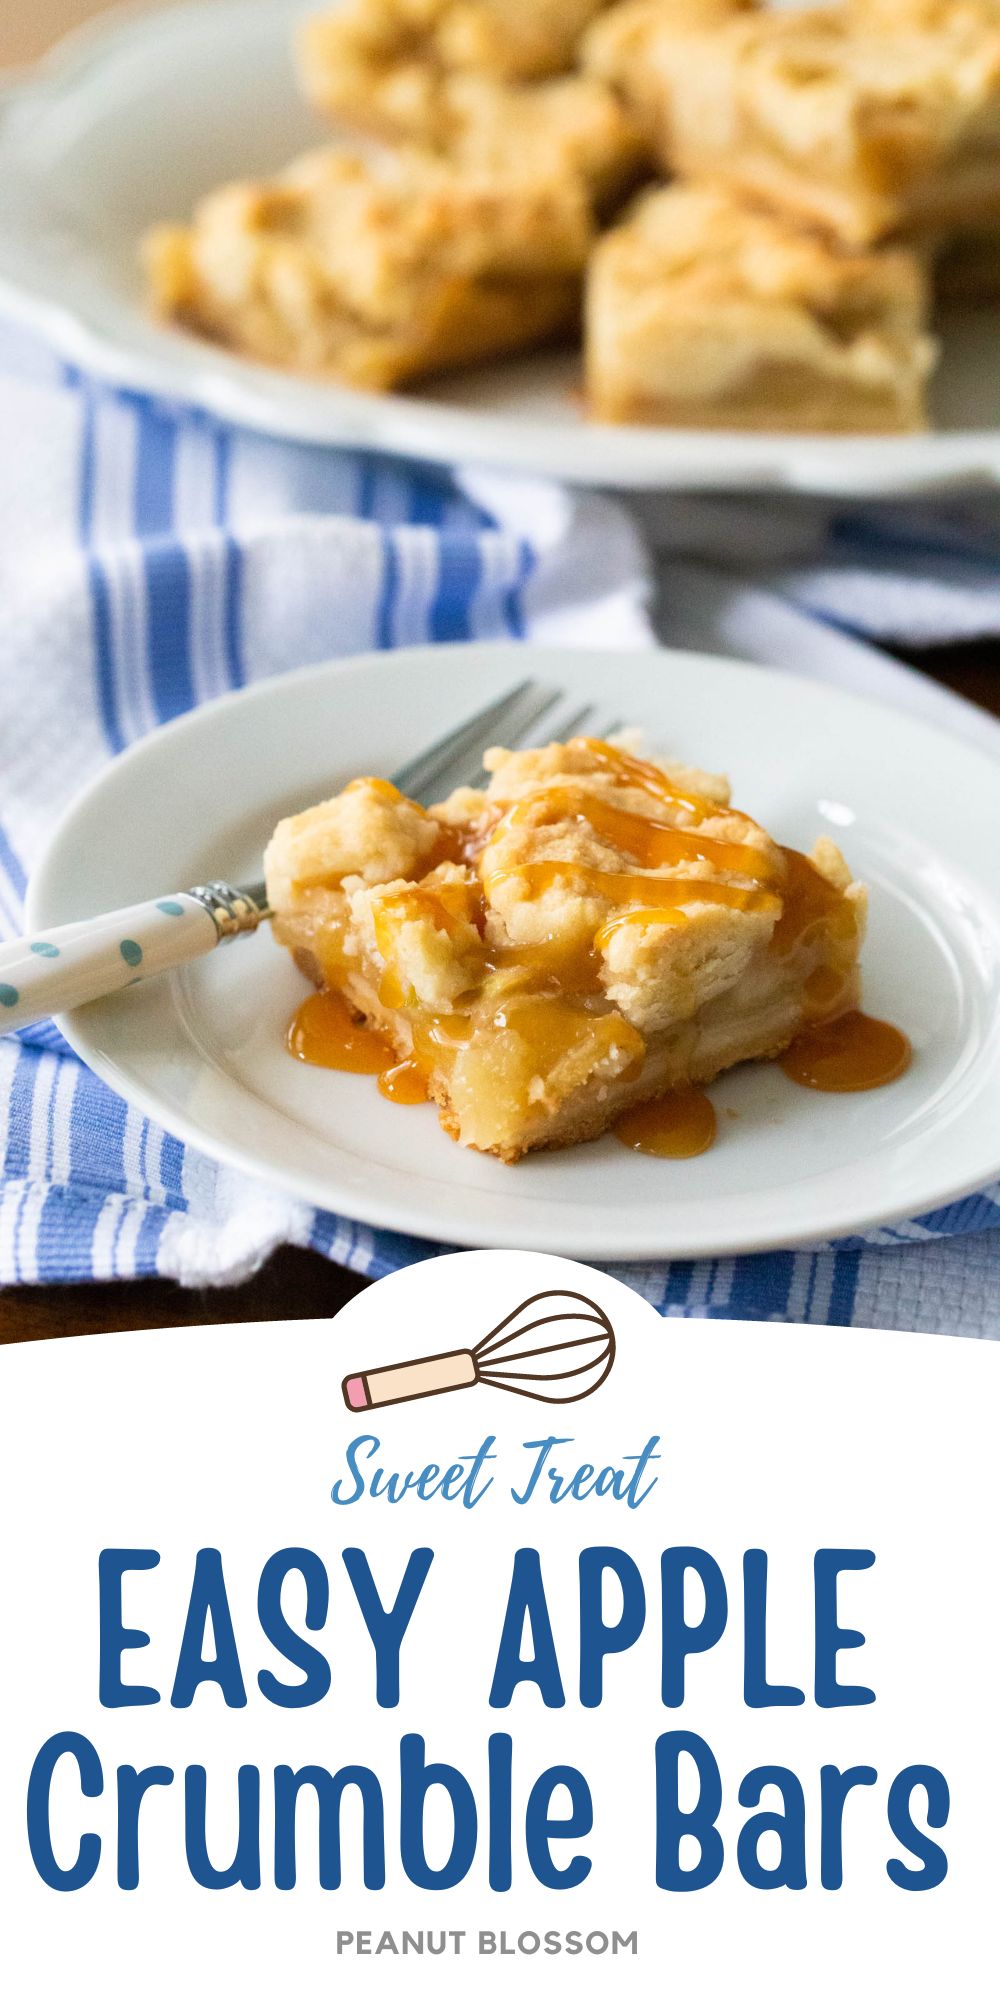 The apple crumble bars are served on a white plate with a drizzle of caramel sauce over the top.